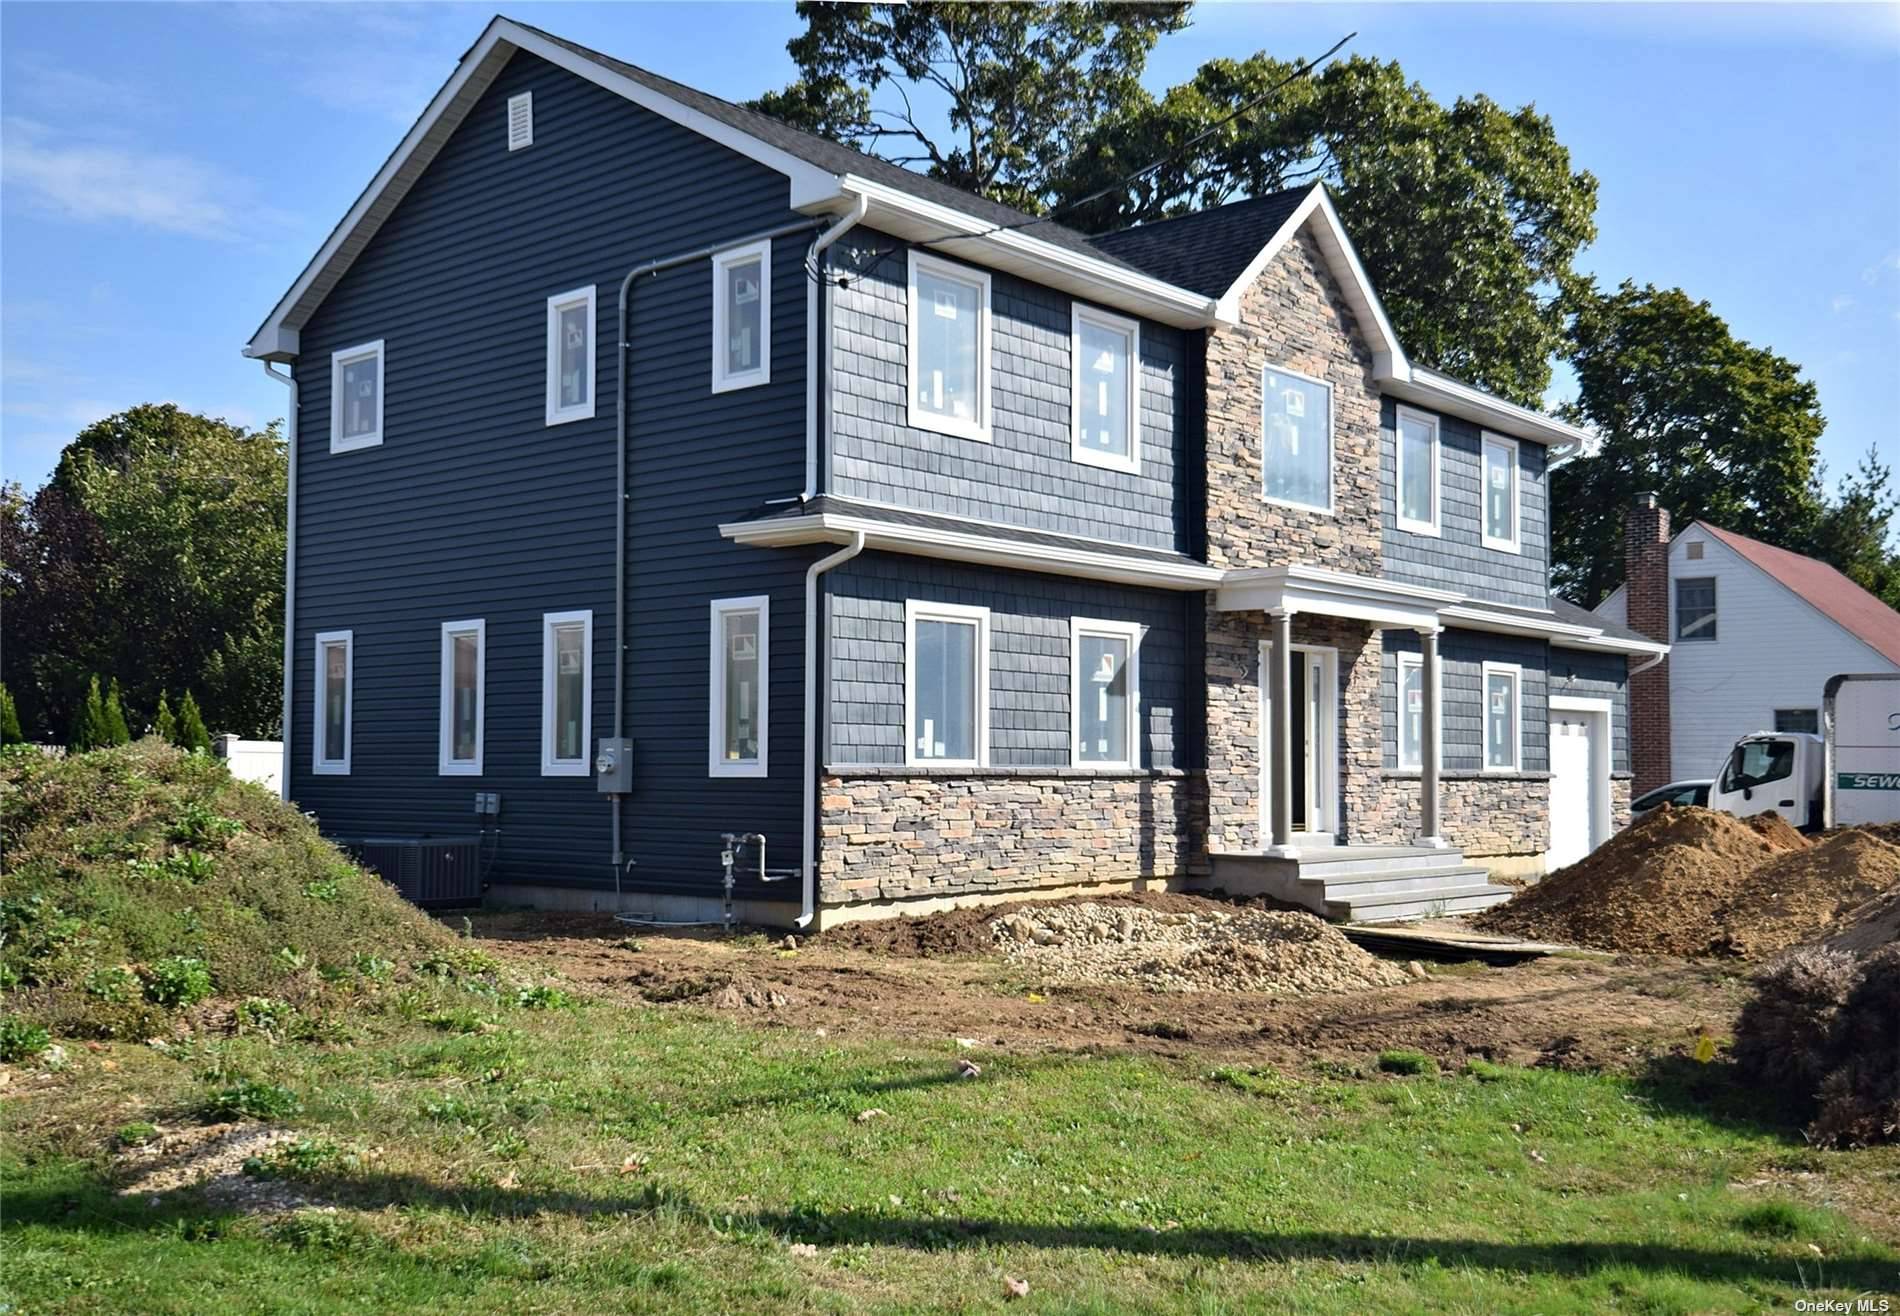 A true QUALITY home, featuring 2x6 exterior construction super insulated ; first grade vinyl siding W stone accents, blue stone front steps, Drywells for all gutters and leaders, First grade ...